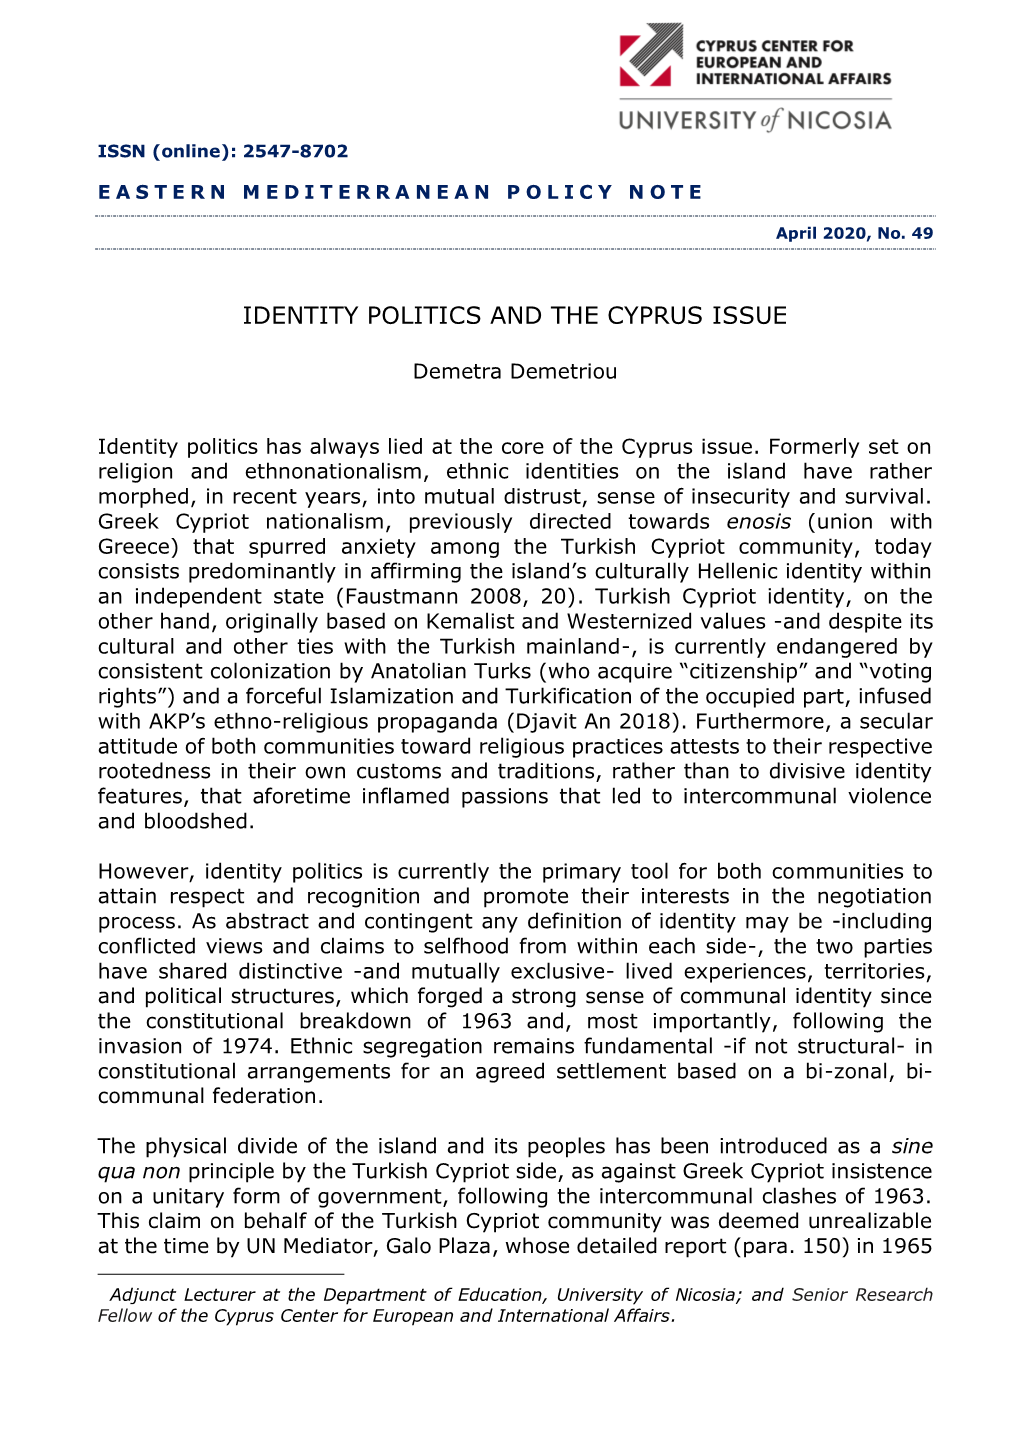 Identity Politics and the Cyprus Issue